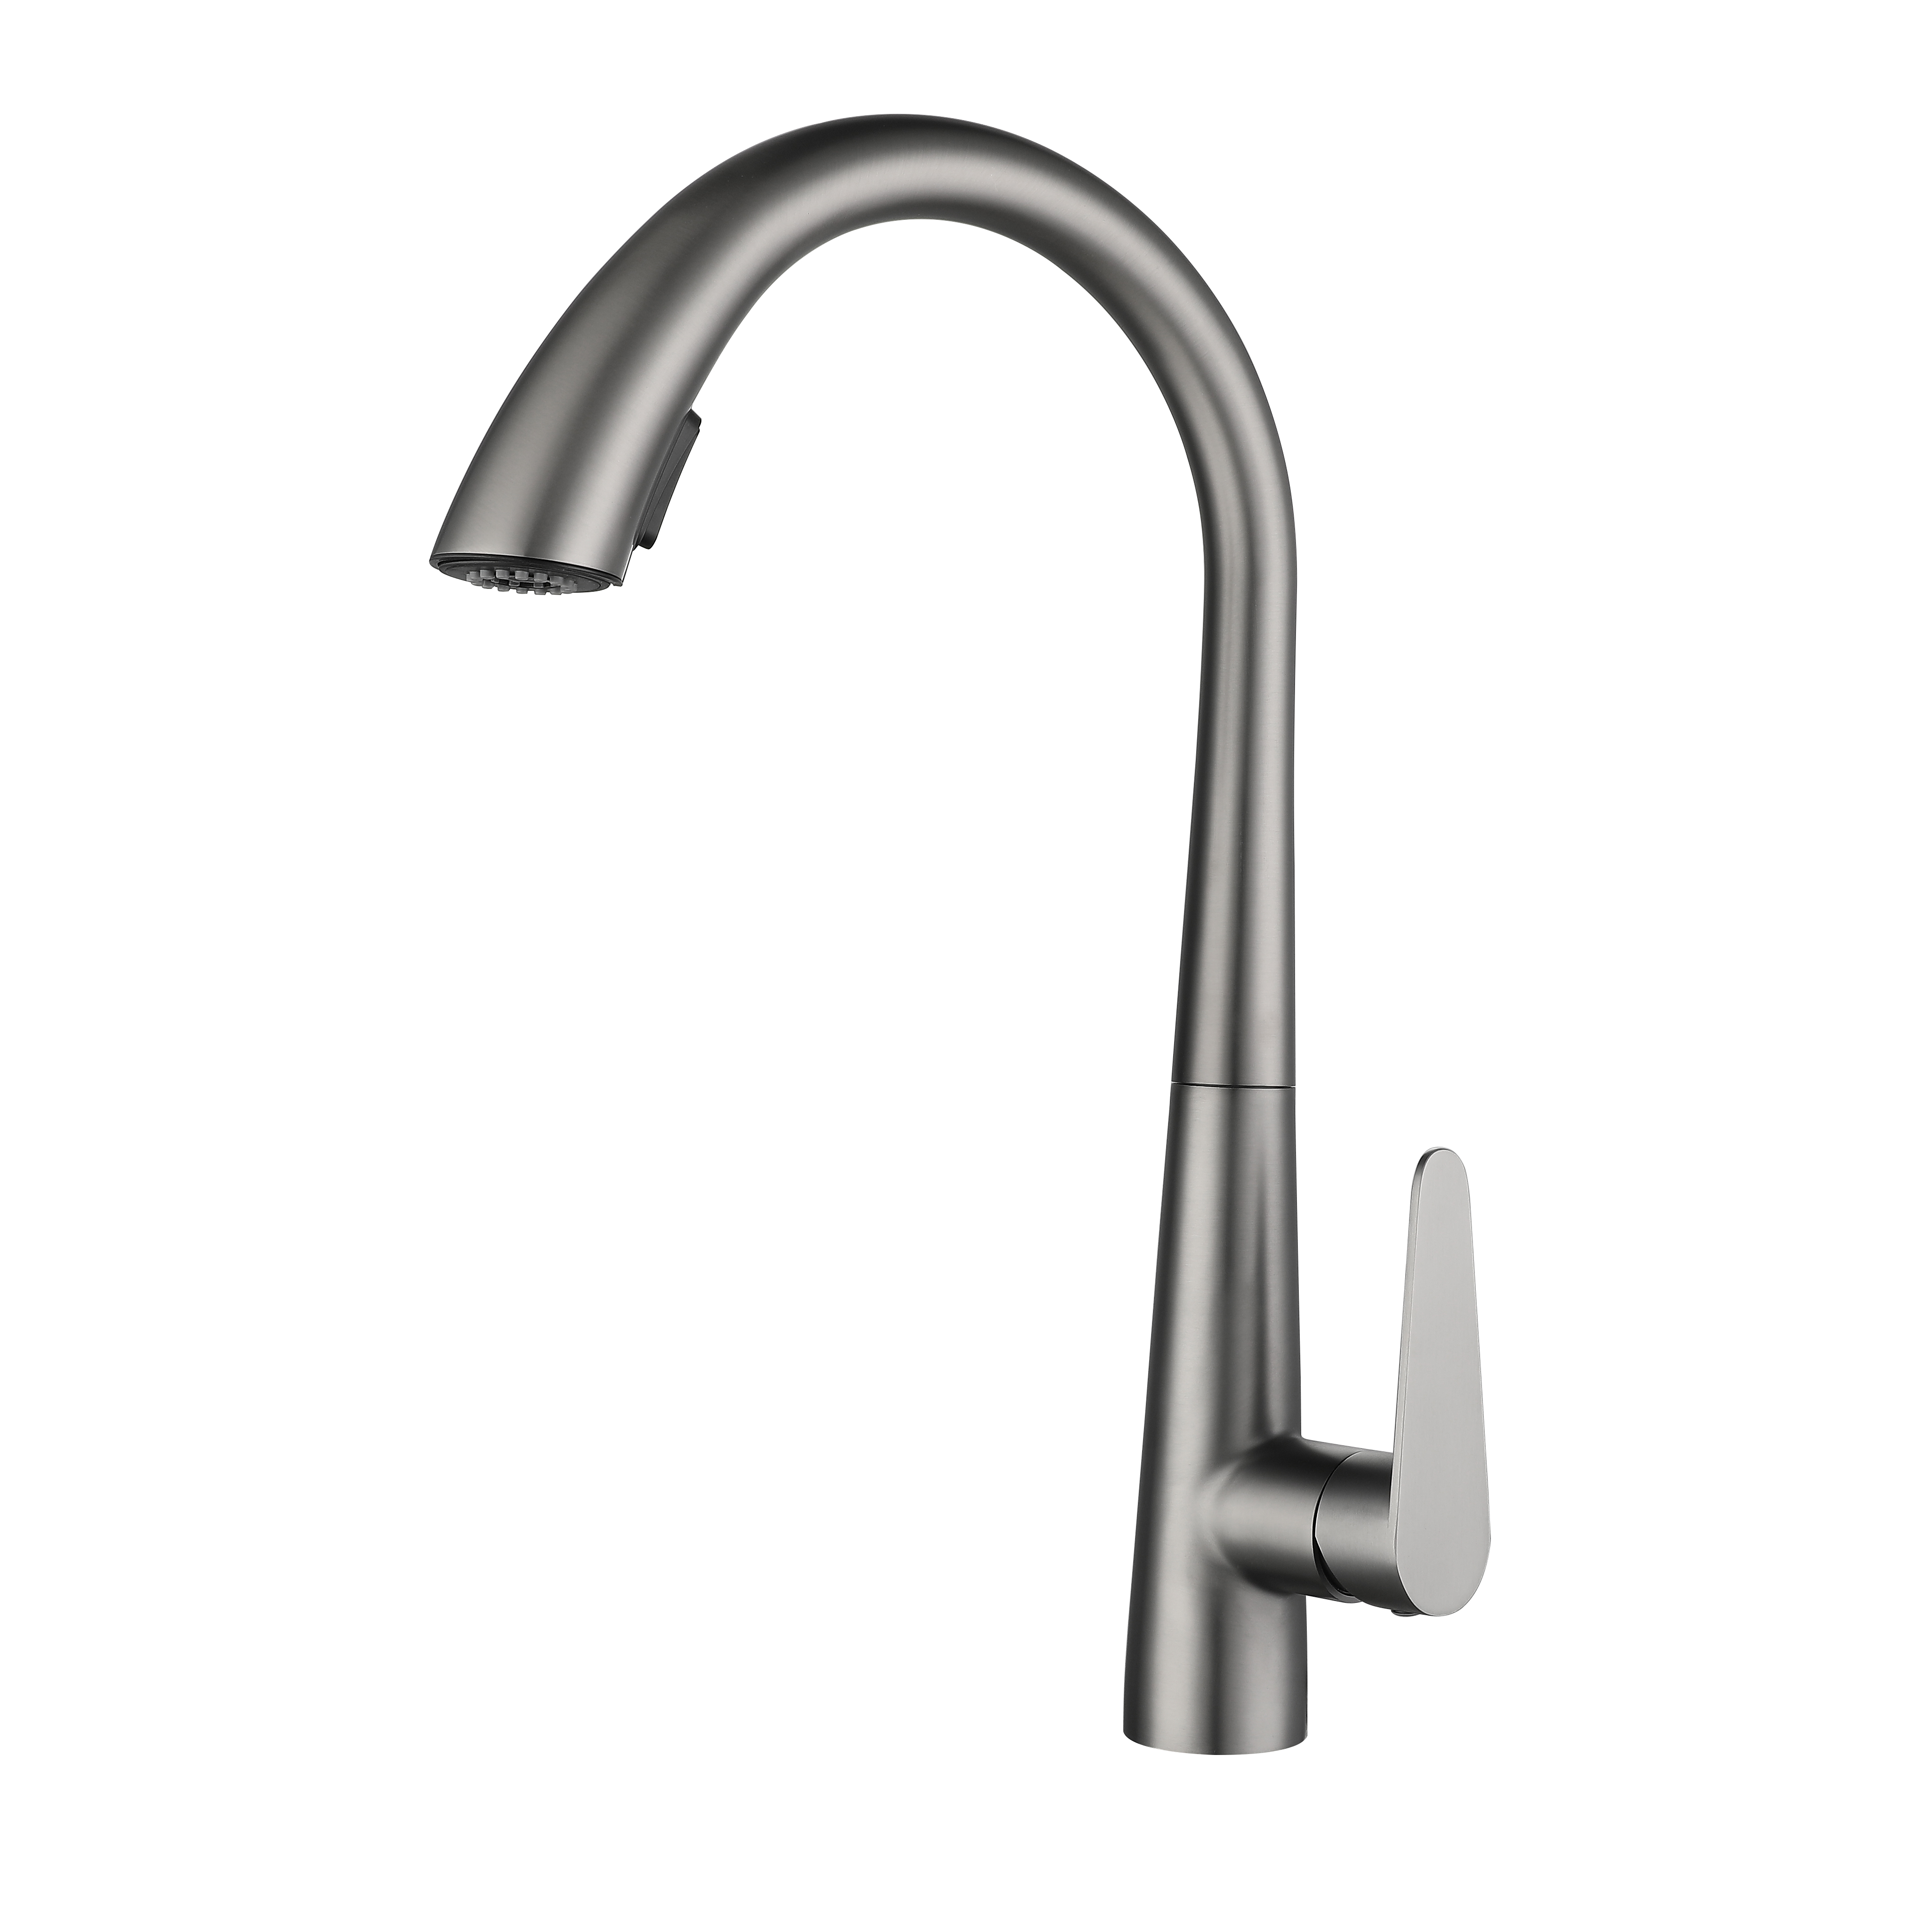 Gun Metal Grey faucet stainless steel Kitchen Faucet Flexible Pull out  Faucet with Sprayer